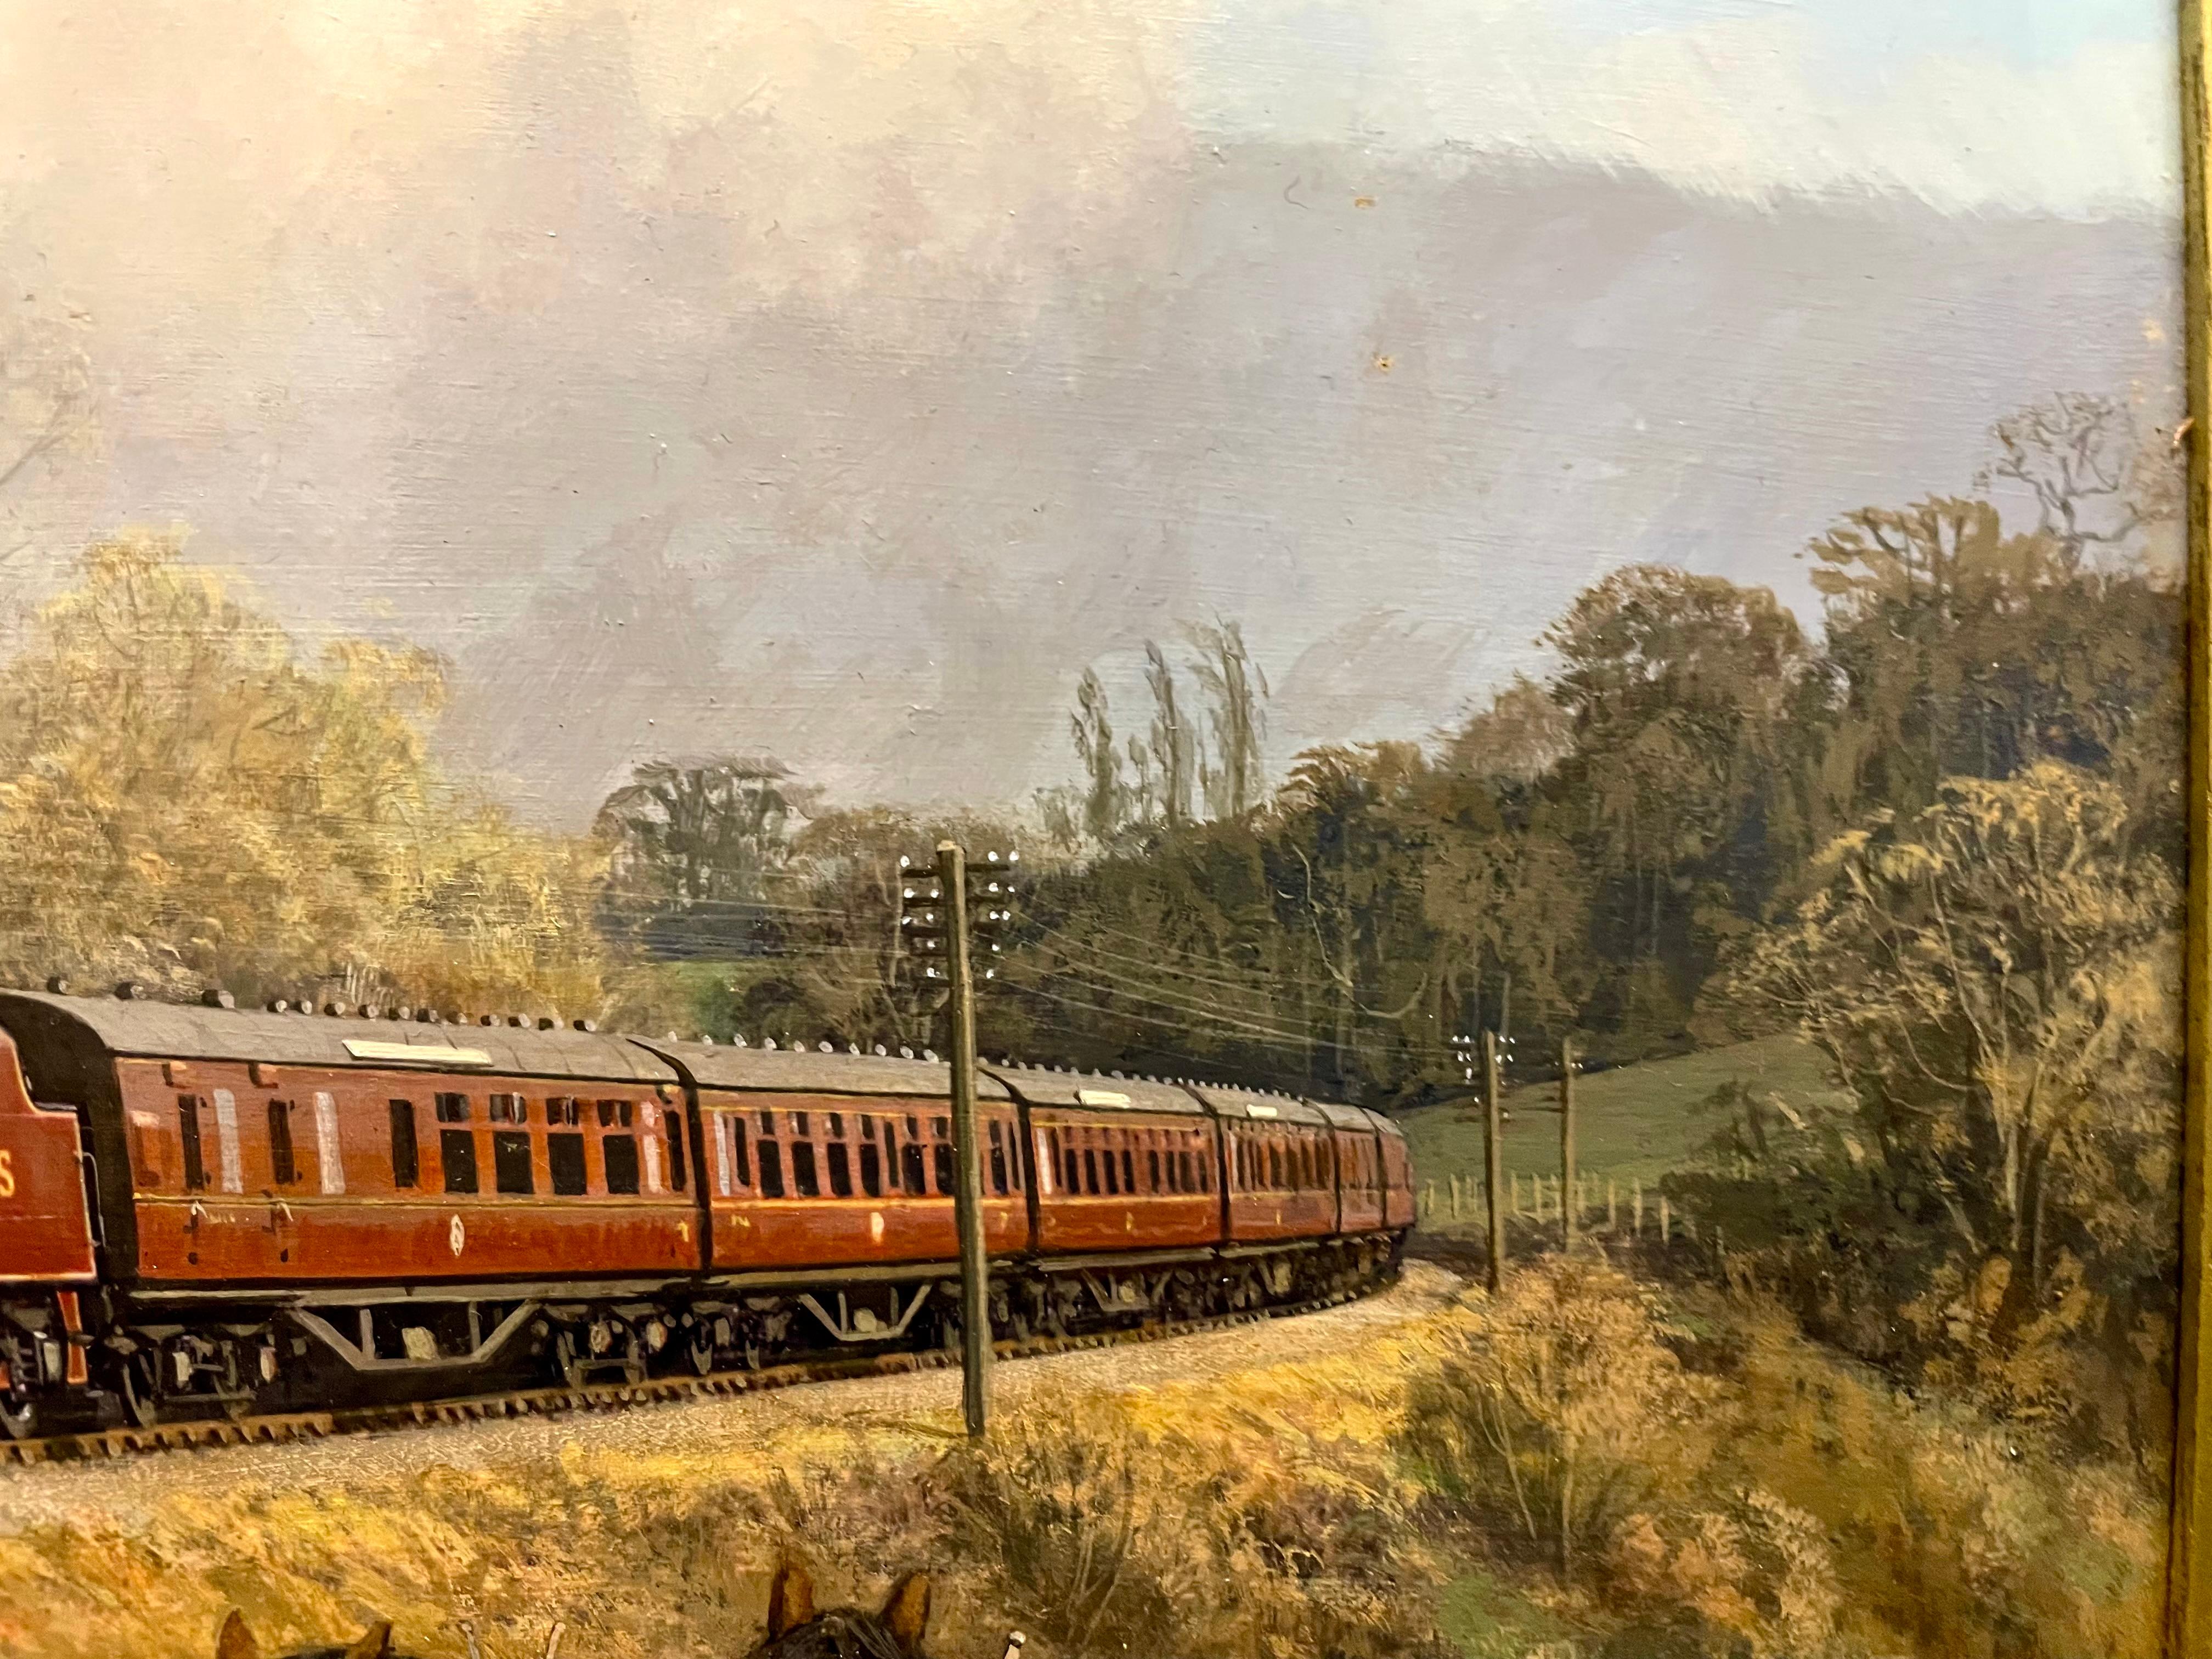 LMS Locomotive passing Ploughman - Photorealist Painting by Gerald Bloom